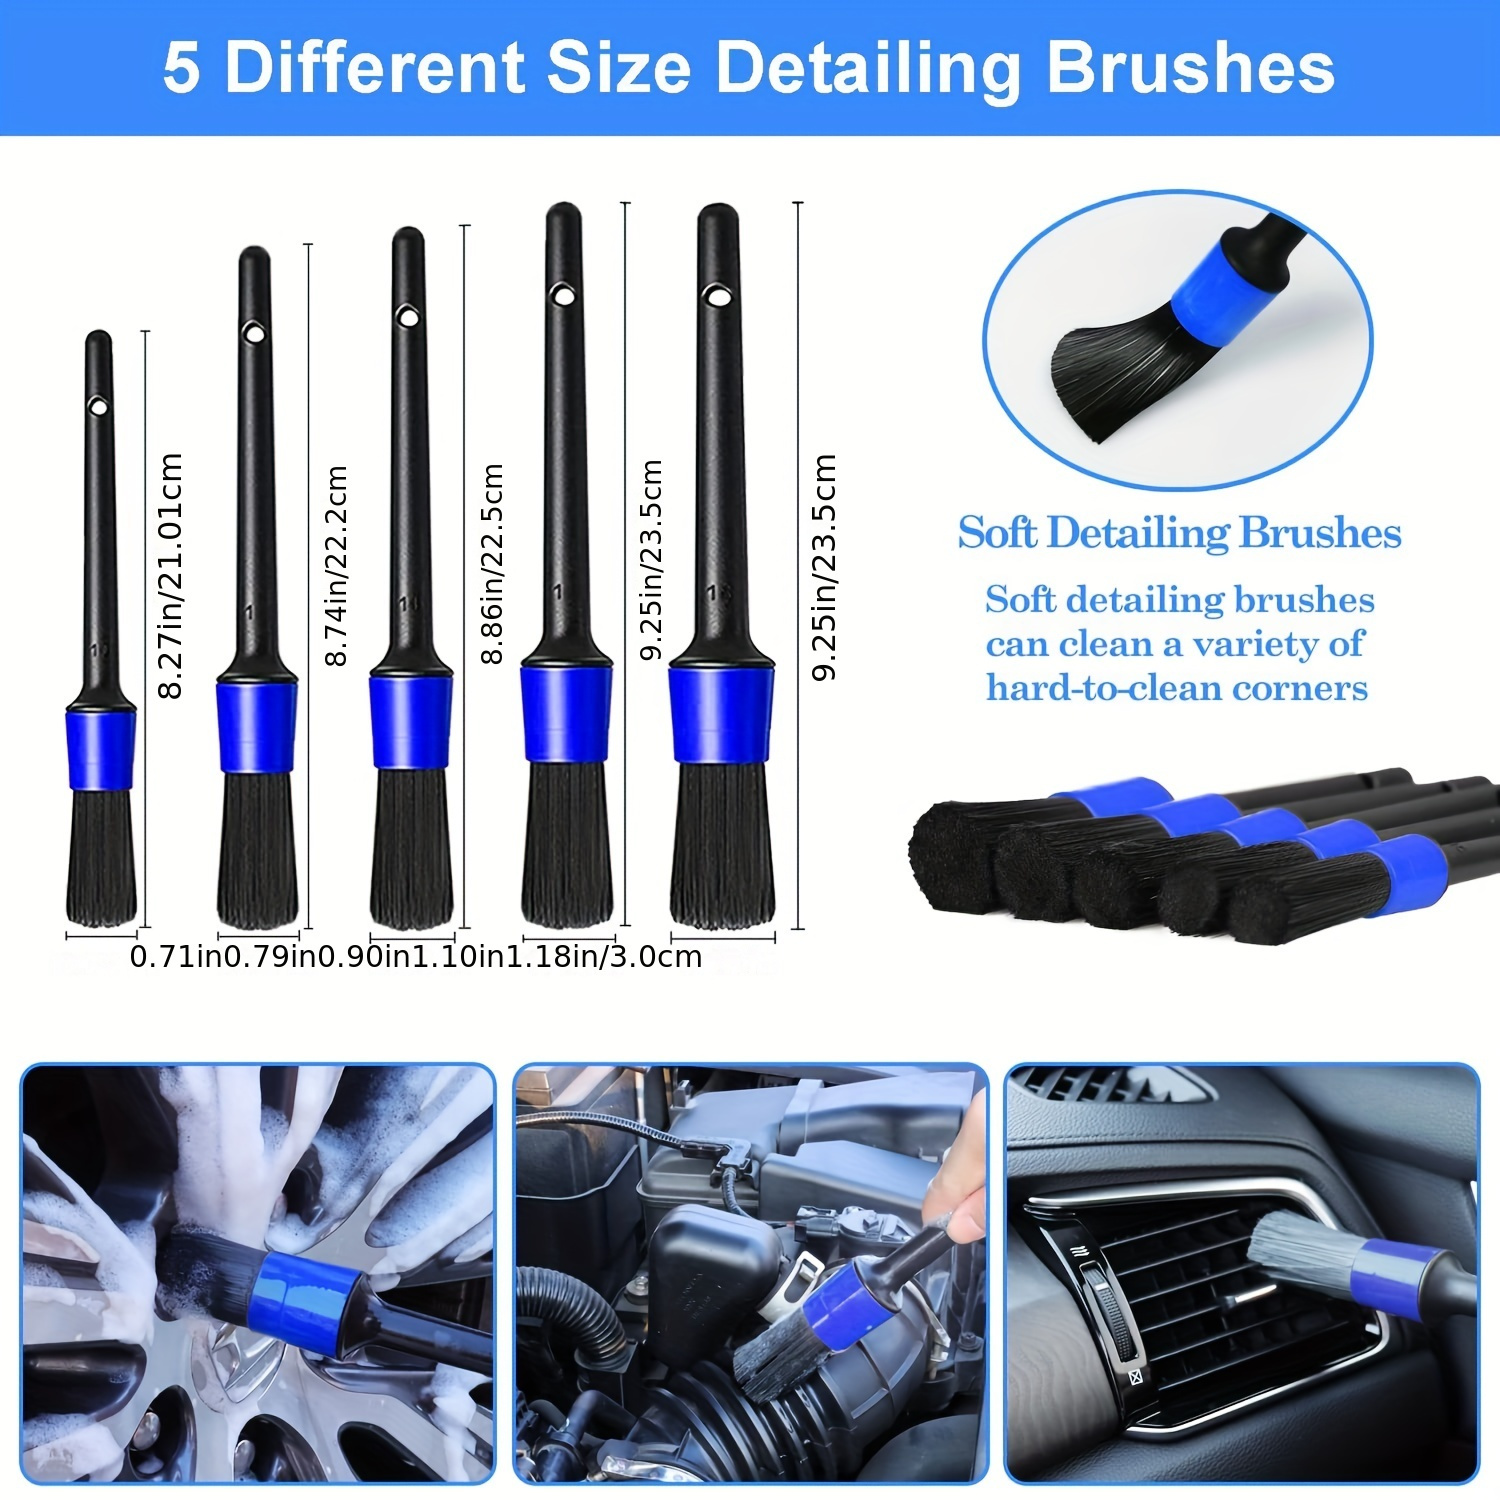 Luleylee Car Interior Detailing Kit, 21pcs Detailing Brush Set with Windshield Cleaning Tool and Tire Brush, Leather & Textile Car Interior Brush, Car Detail